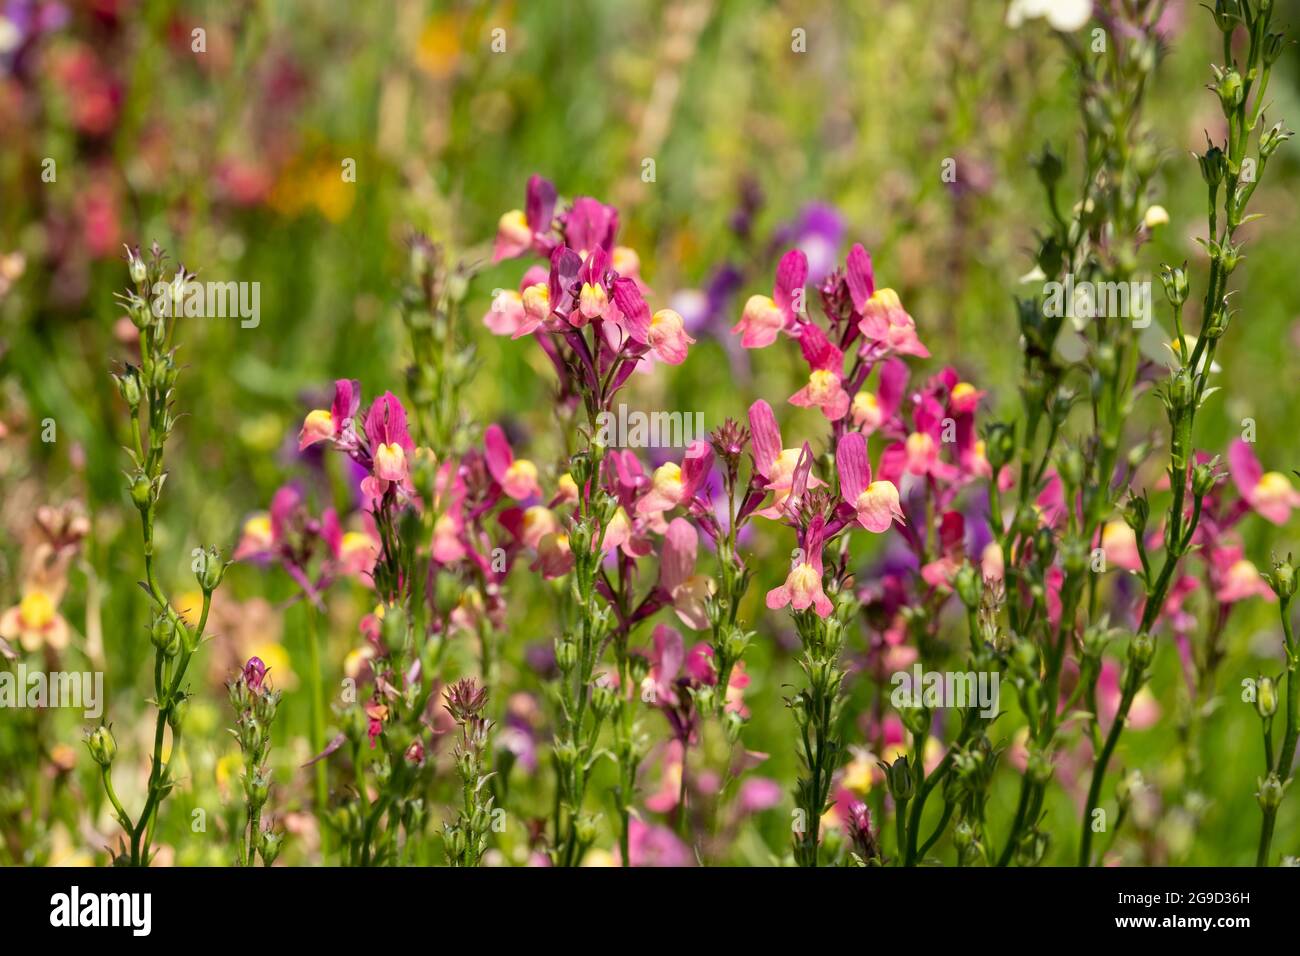 Colourful ornamental linaria maroccana flowers, also known as Northern Light, Fairy Bouquet and toadflax. The flower is native to Morocco. Stock Photo